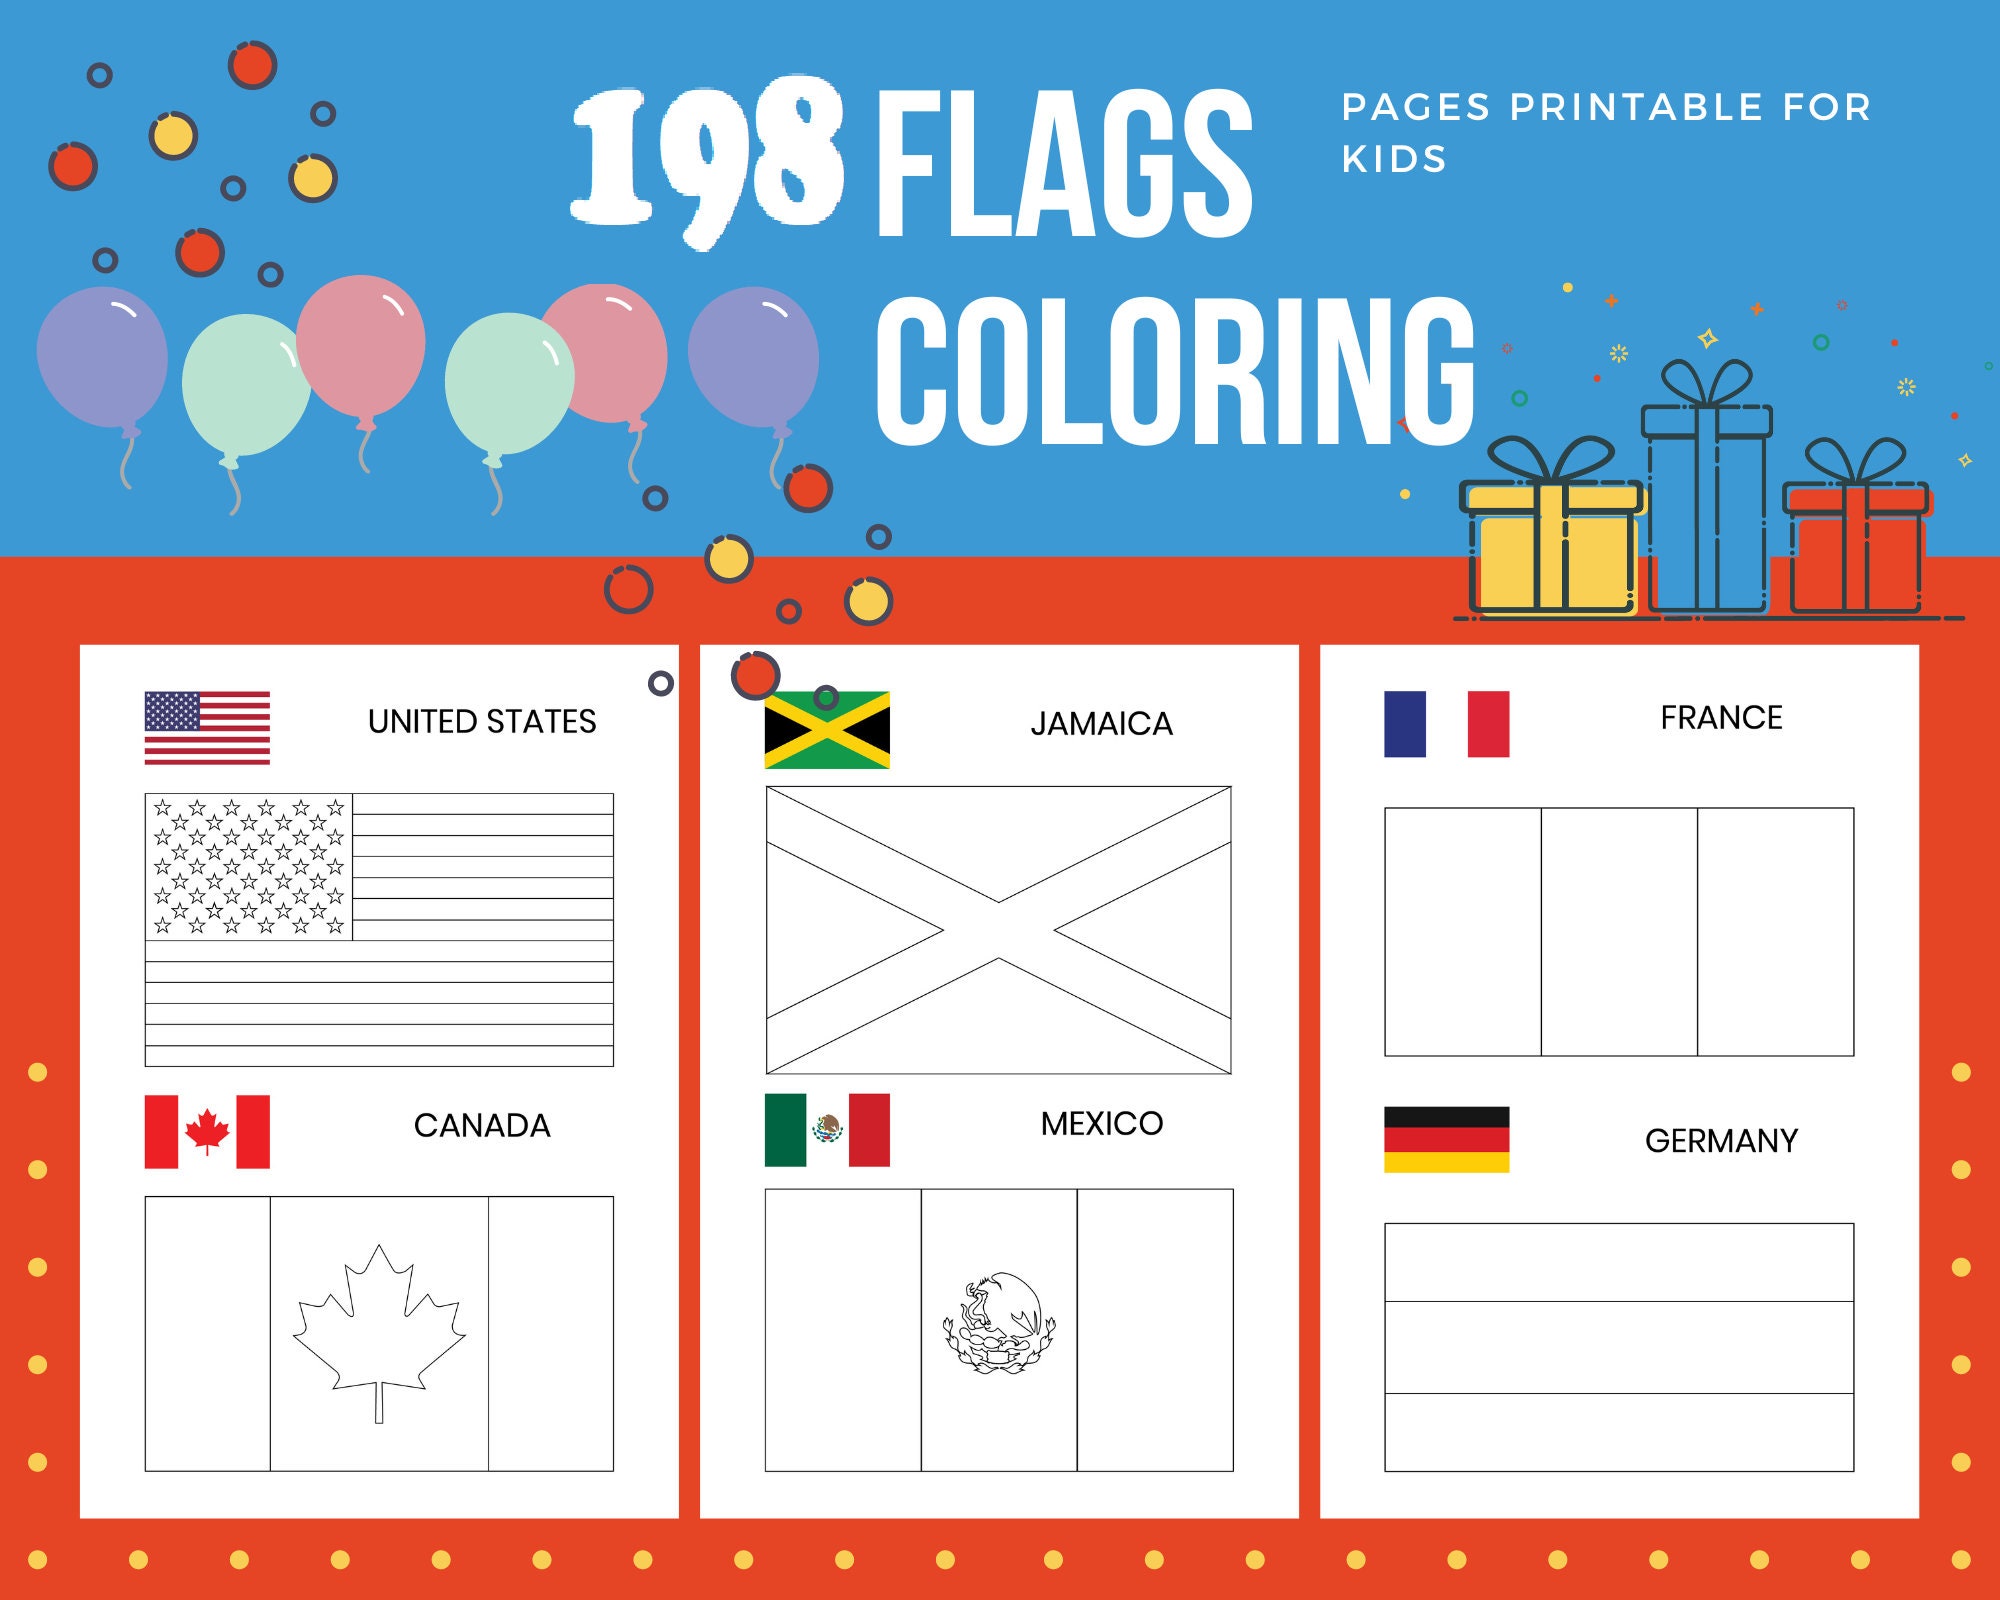 Flags coloring pages printable for kids pdf file us letter instant download kdp coloring book for kids